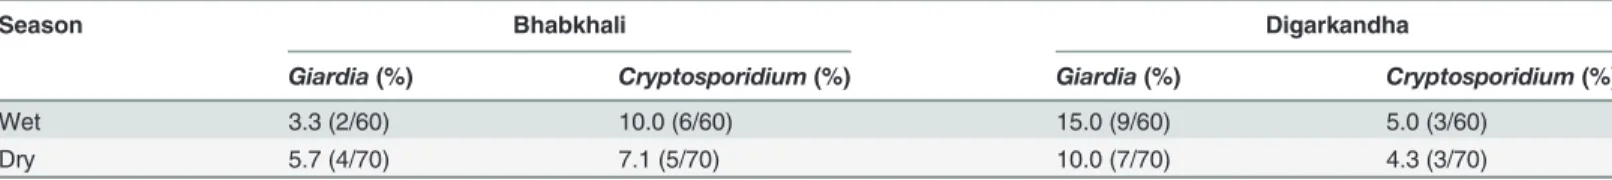 Table 1. Seasonal occurrence of Giardia and Cryptosporidium infections in cattle in Bhabkhali and Digarkandha, expressed as percentage and number of investigated samples that were positive.